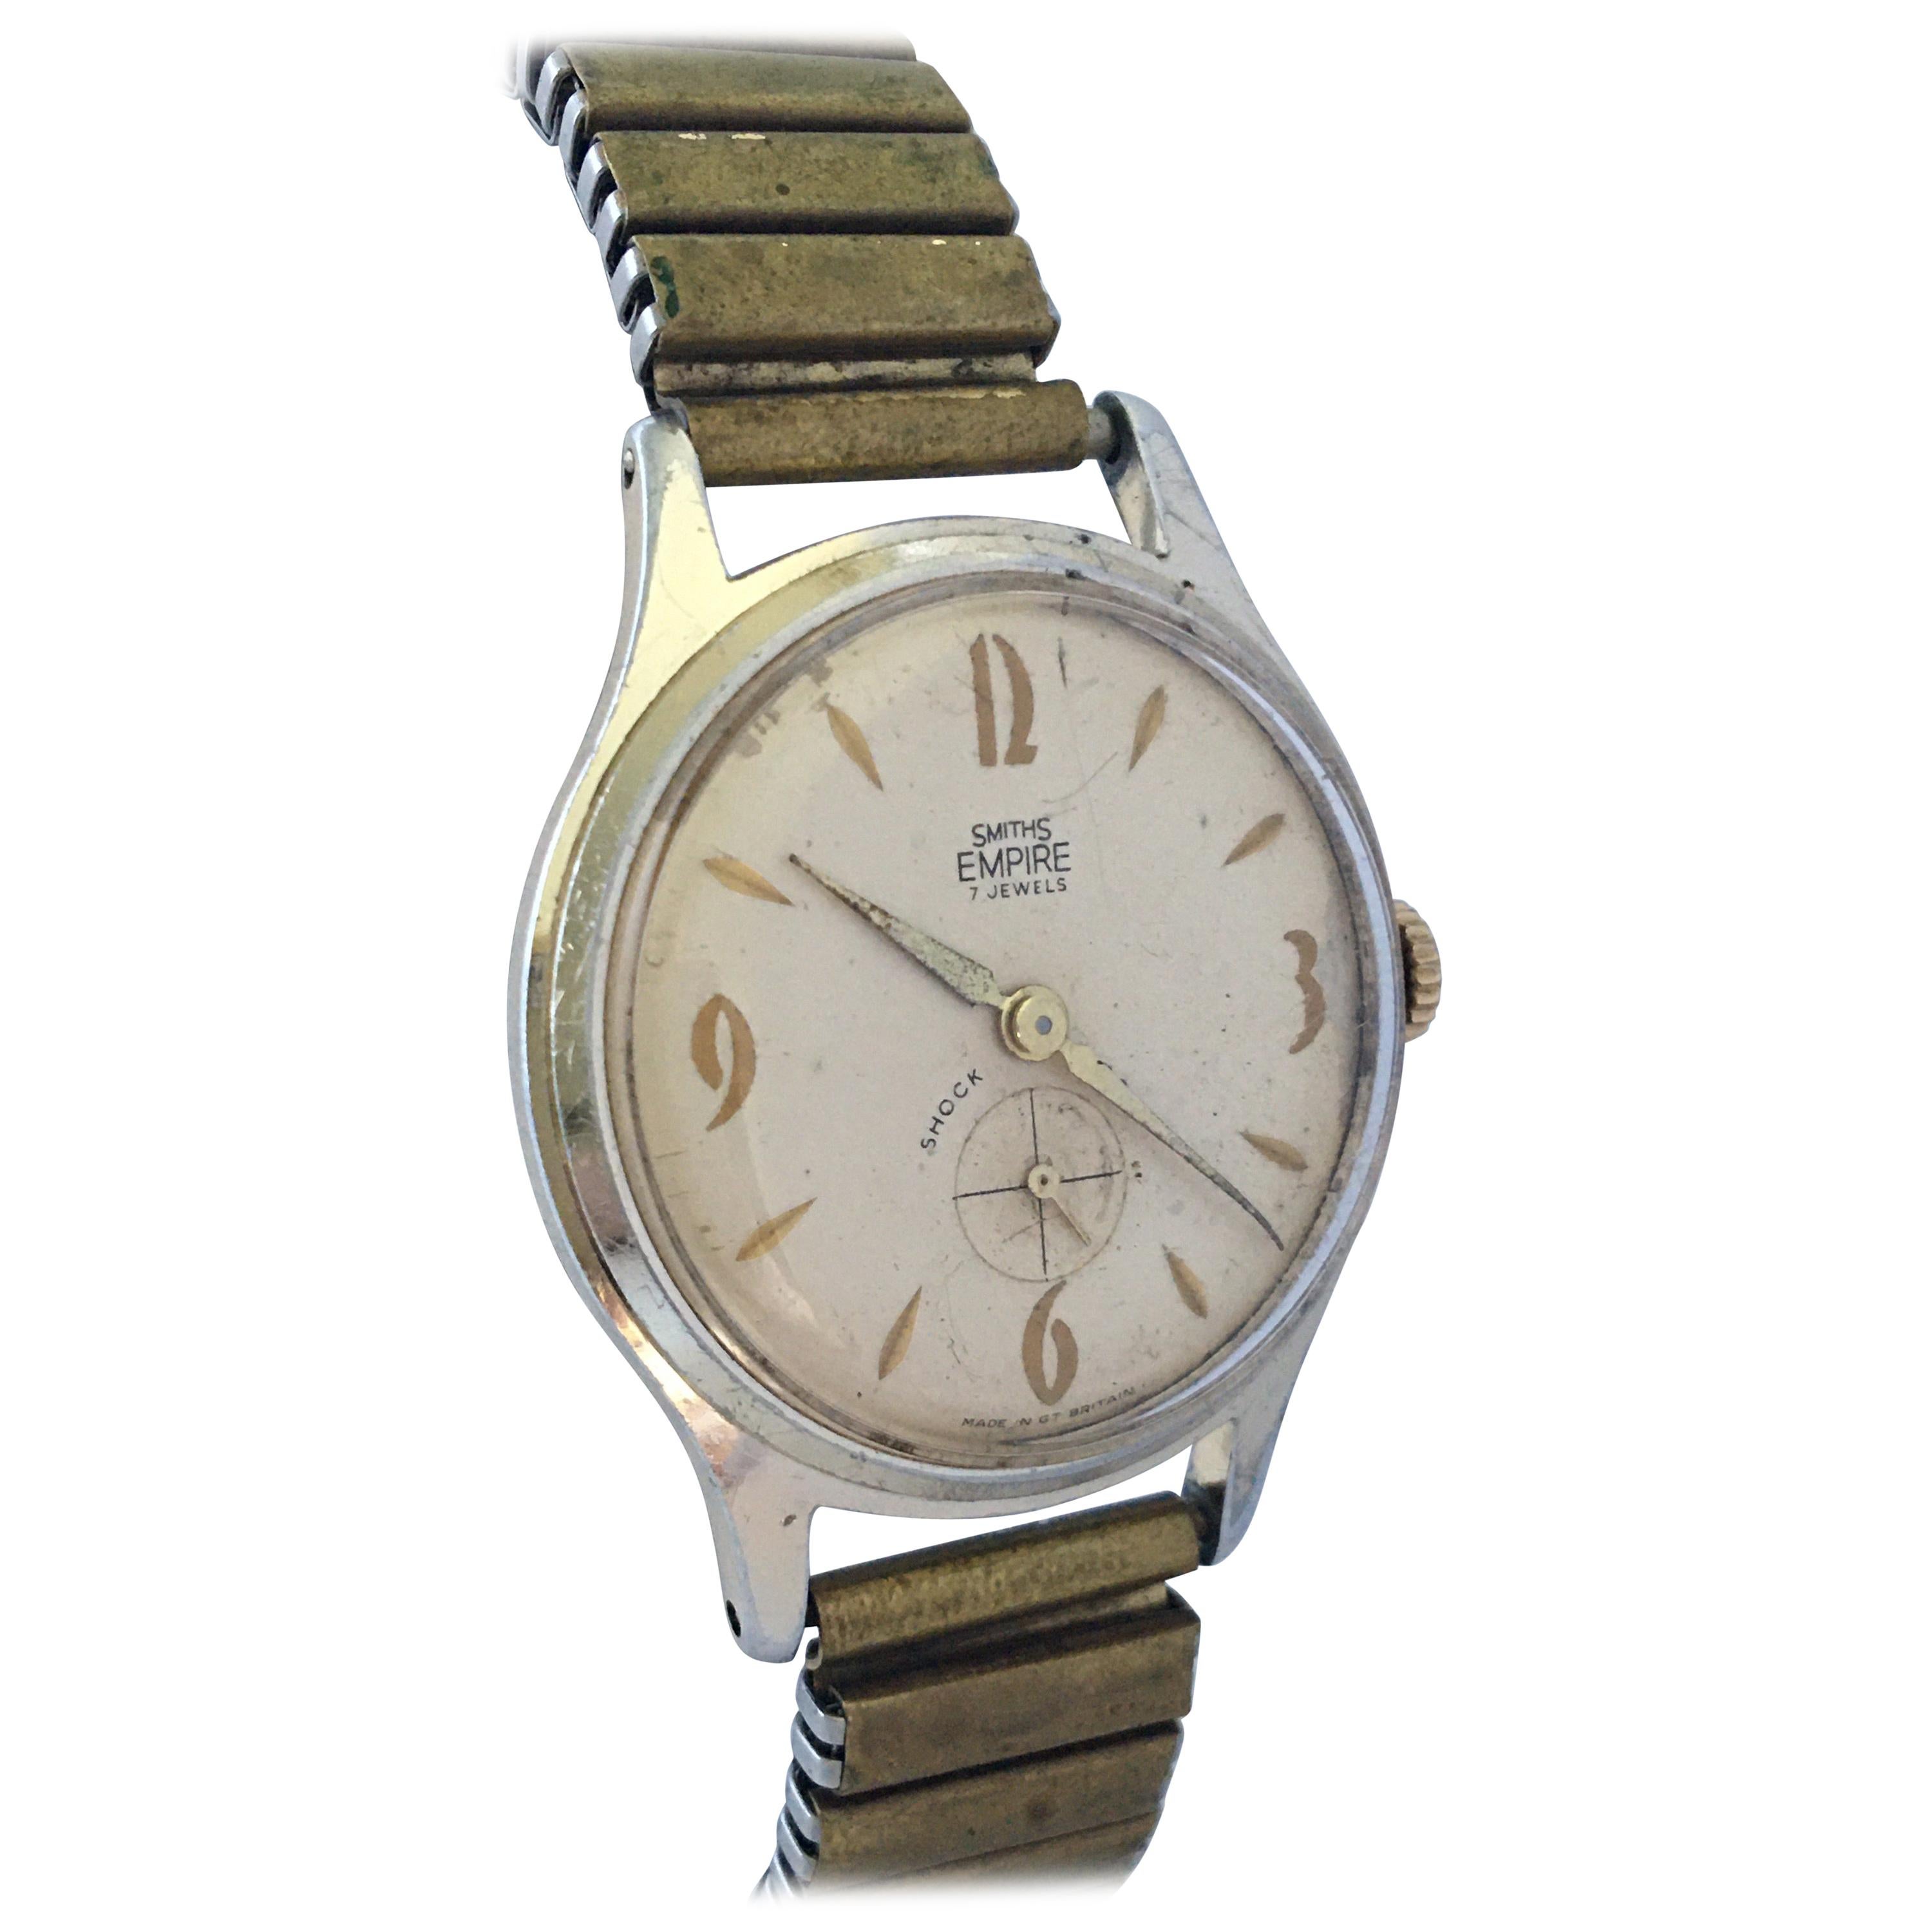 Vintage 1960s Smiths Empire Manual Winding Watch For Sale